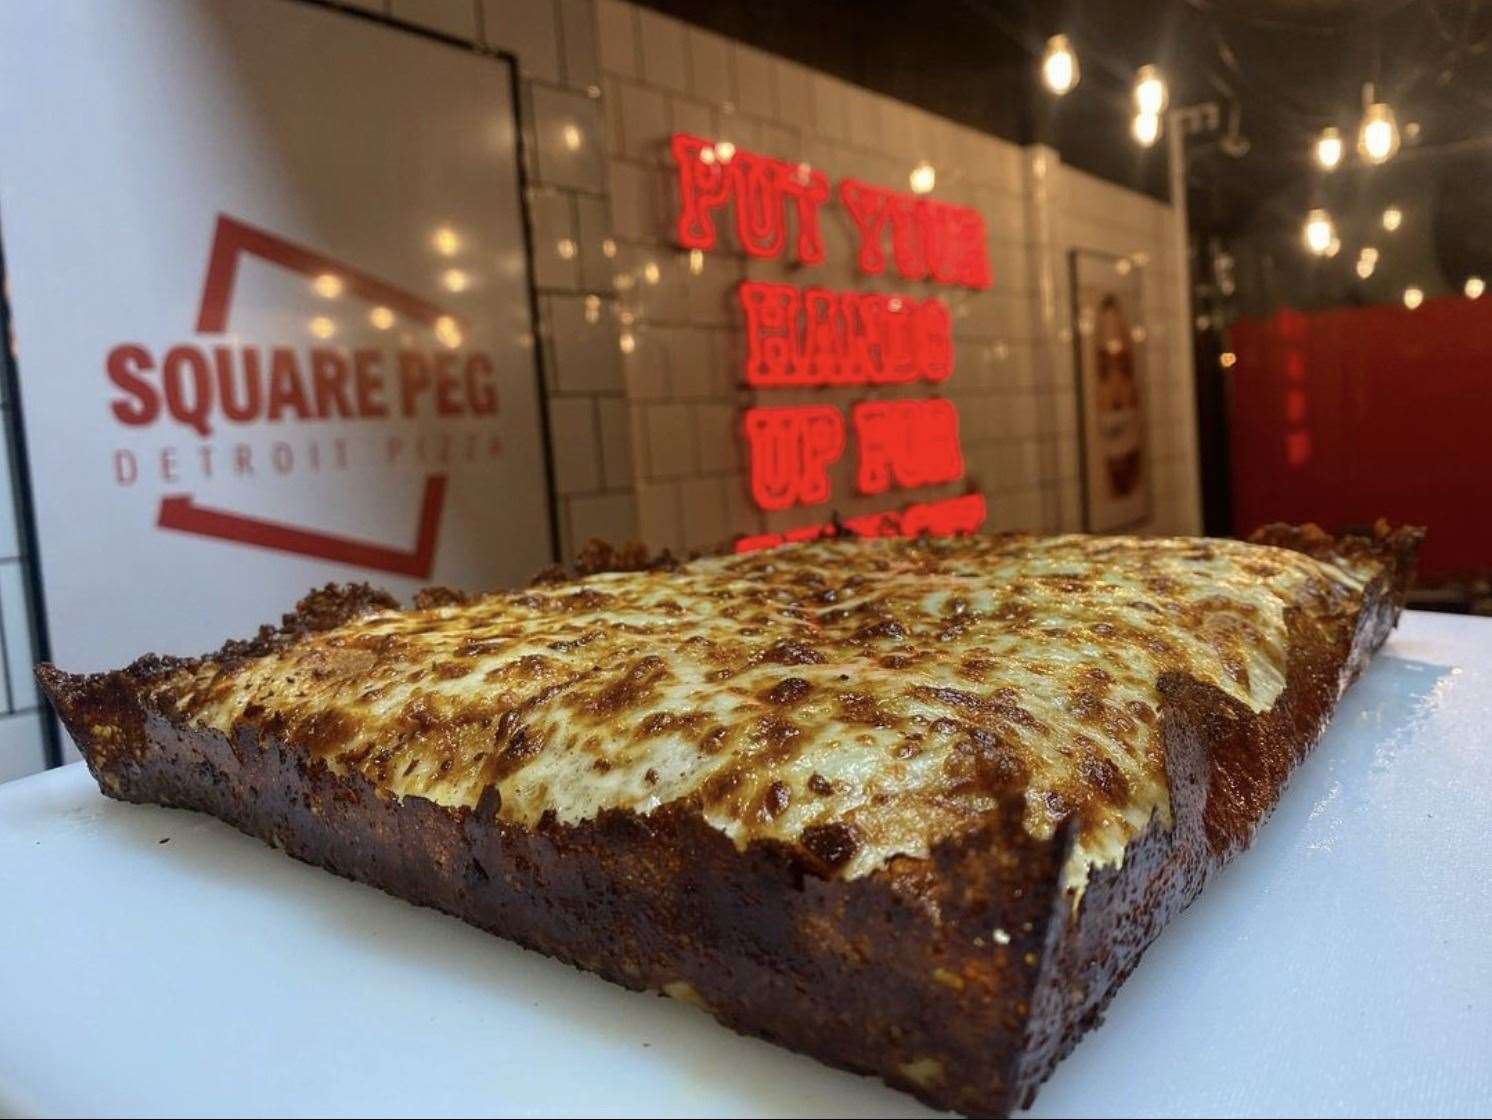 The Detroit-style pizza is known for having a rectangular base. Picture:@squarepegpizza/instagram